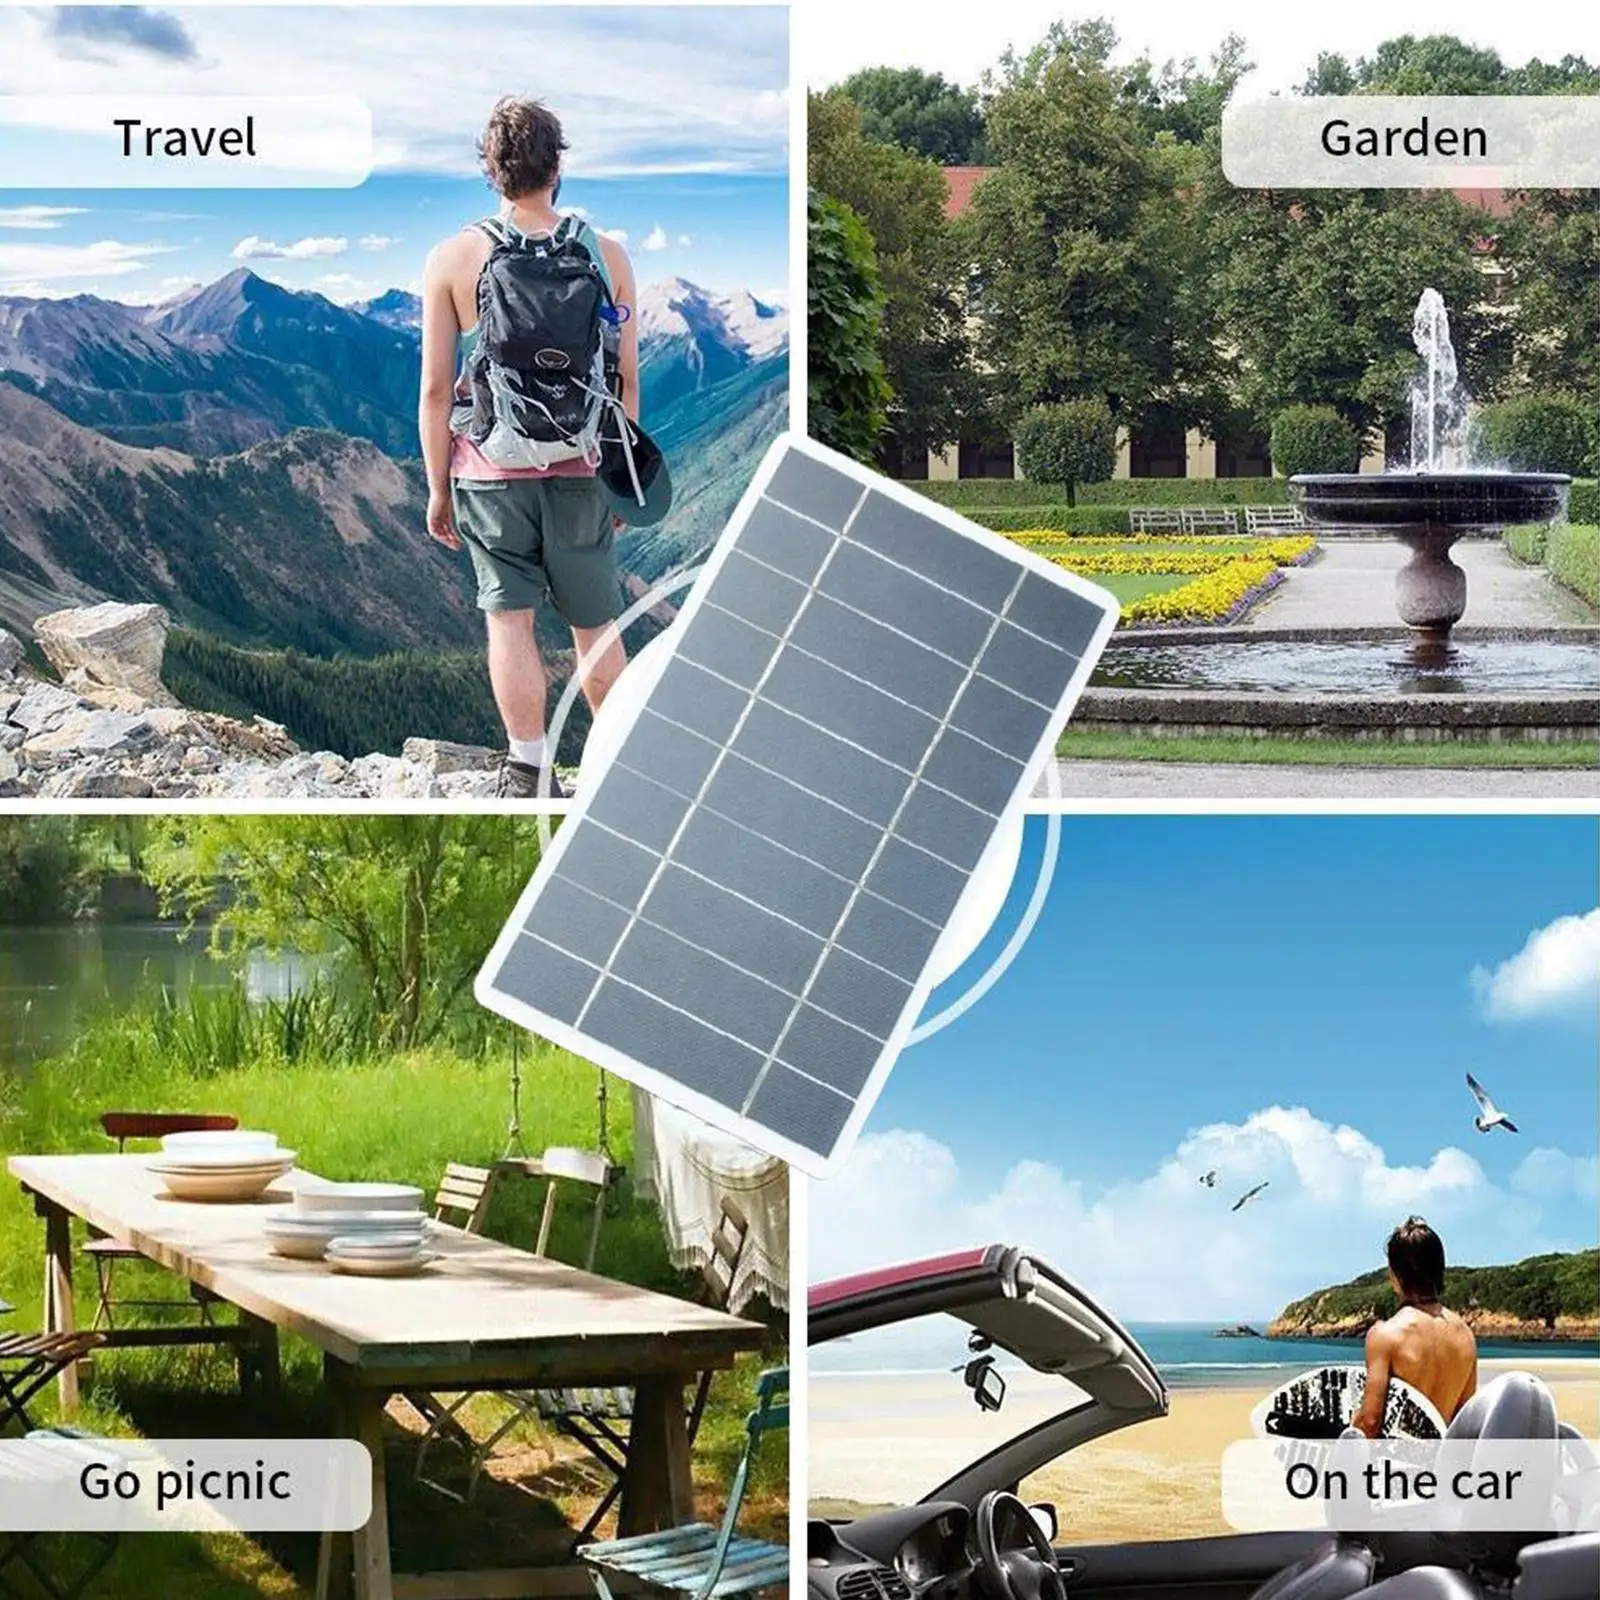 USB Solar Panel Charger 5V 2W 400mA Portable Solar Panel Output USB Outdoor Portable Solar System For Cell Mobile Phone Chargers